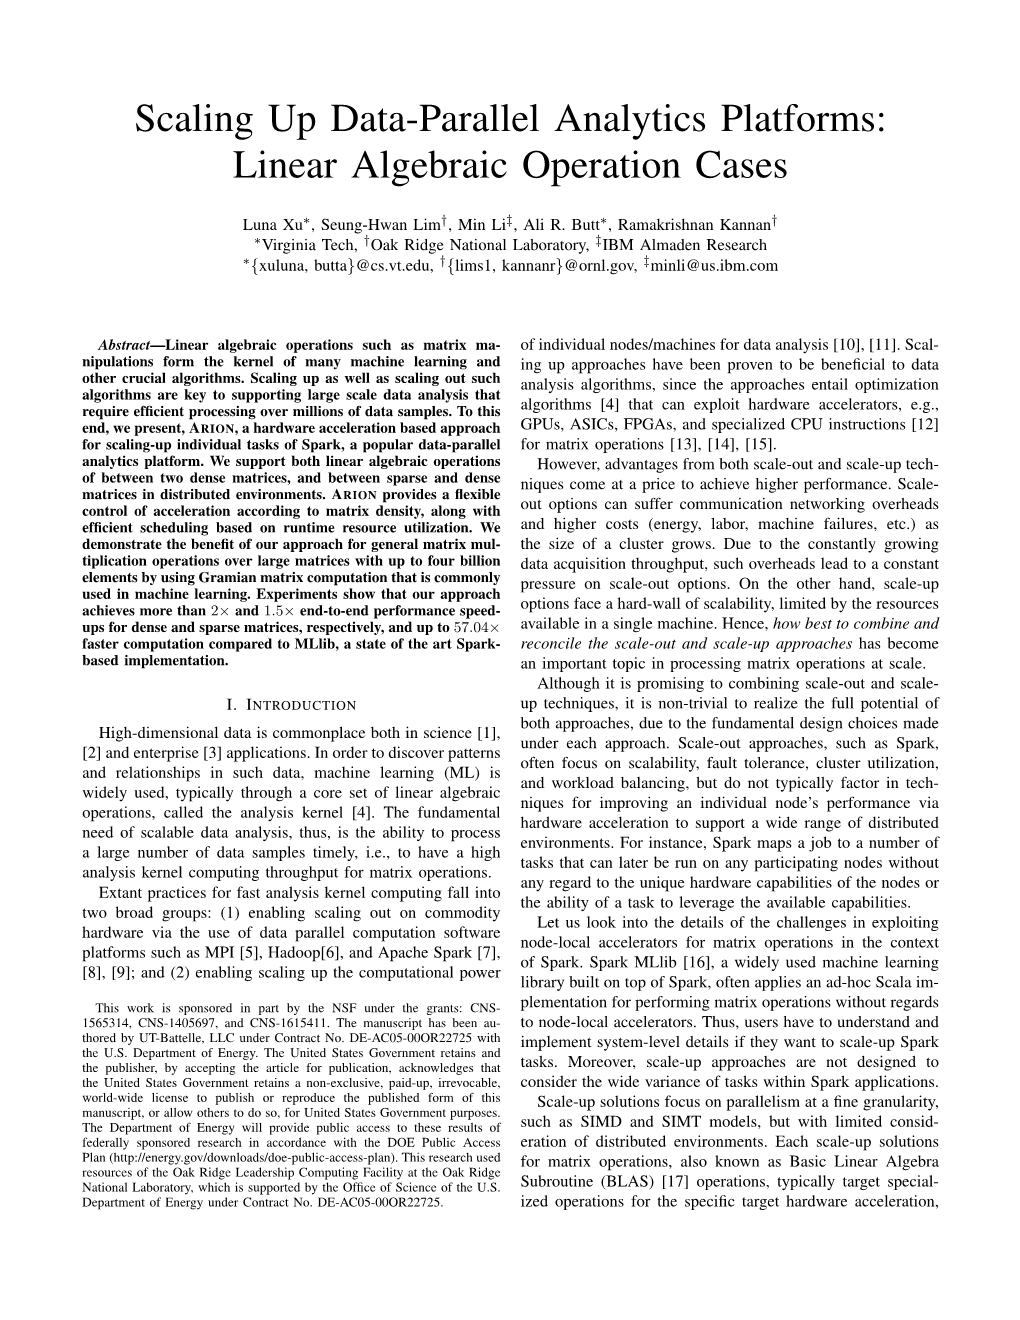 Scaling up Data-Parallel Analytics Platforms: Linear Algebraic Operation Cases